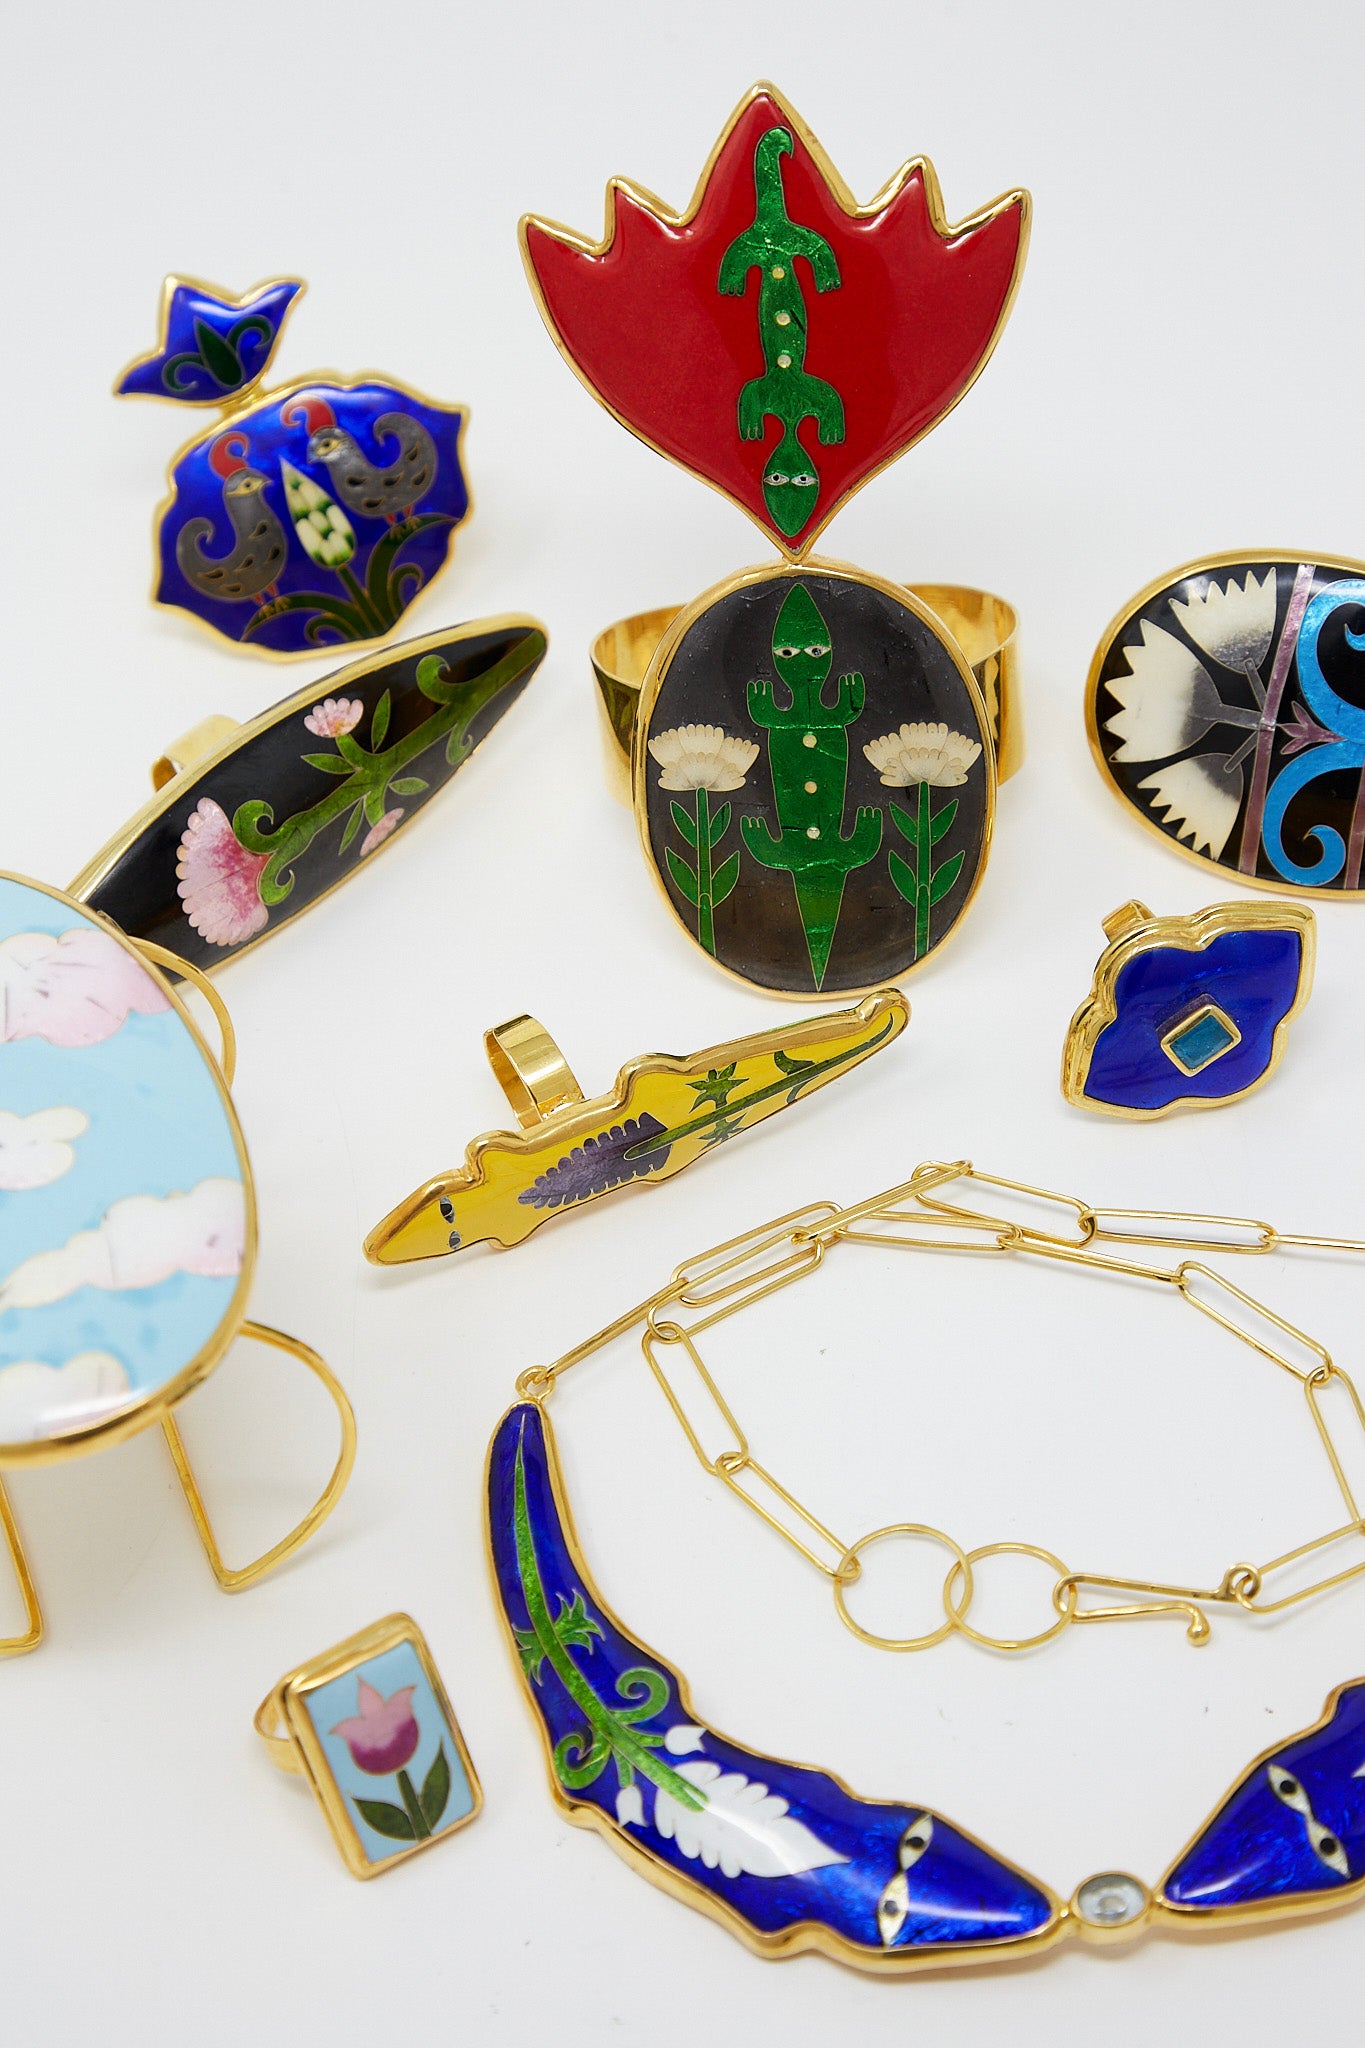 A collection of Sofio Gongli cloisonné bracelets with intricate enamel designs, such as the Bracelet in Clouds with Bird.